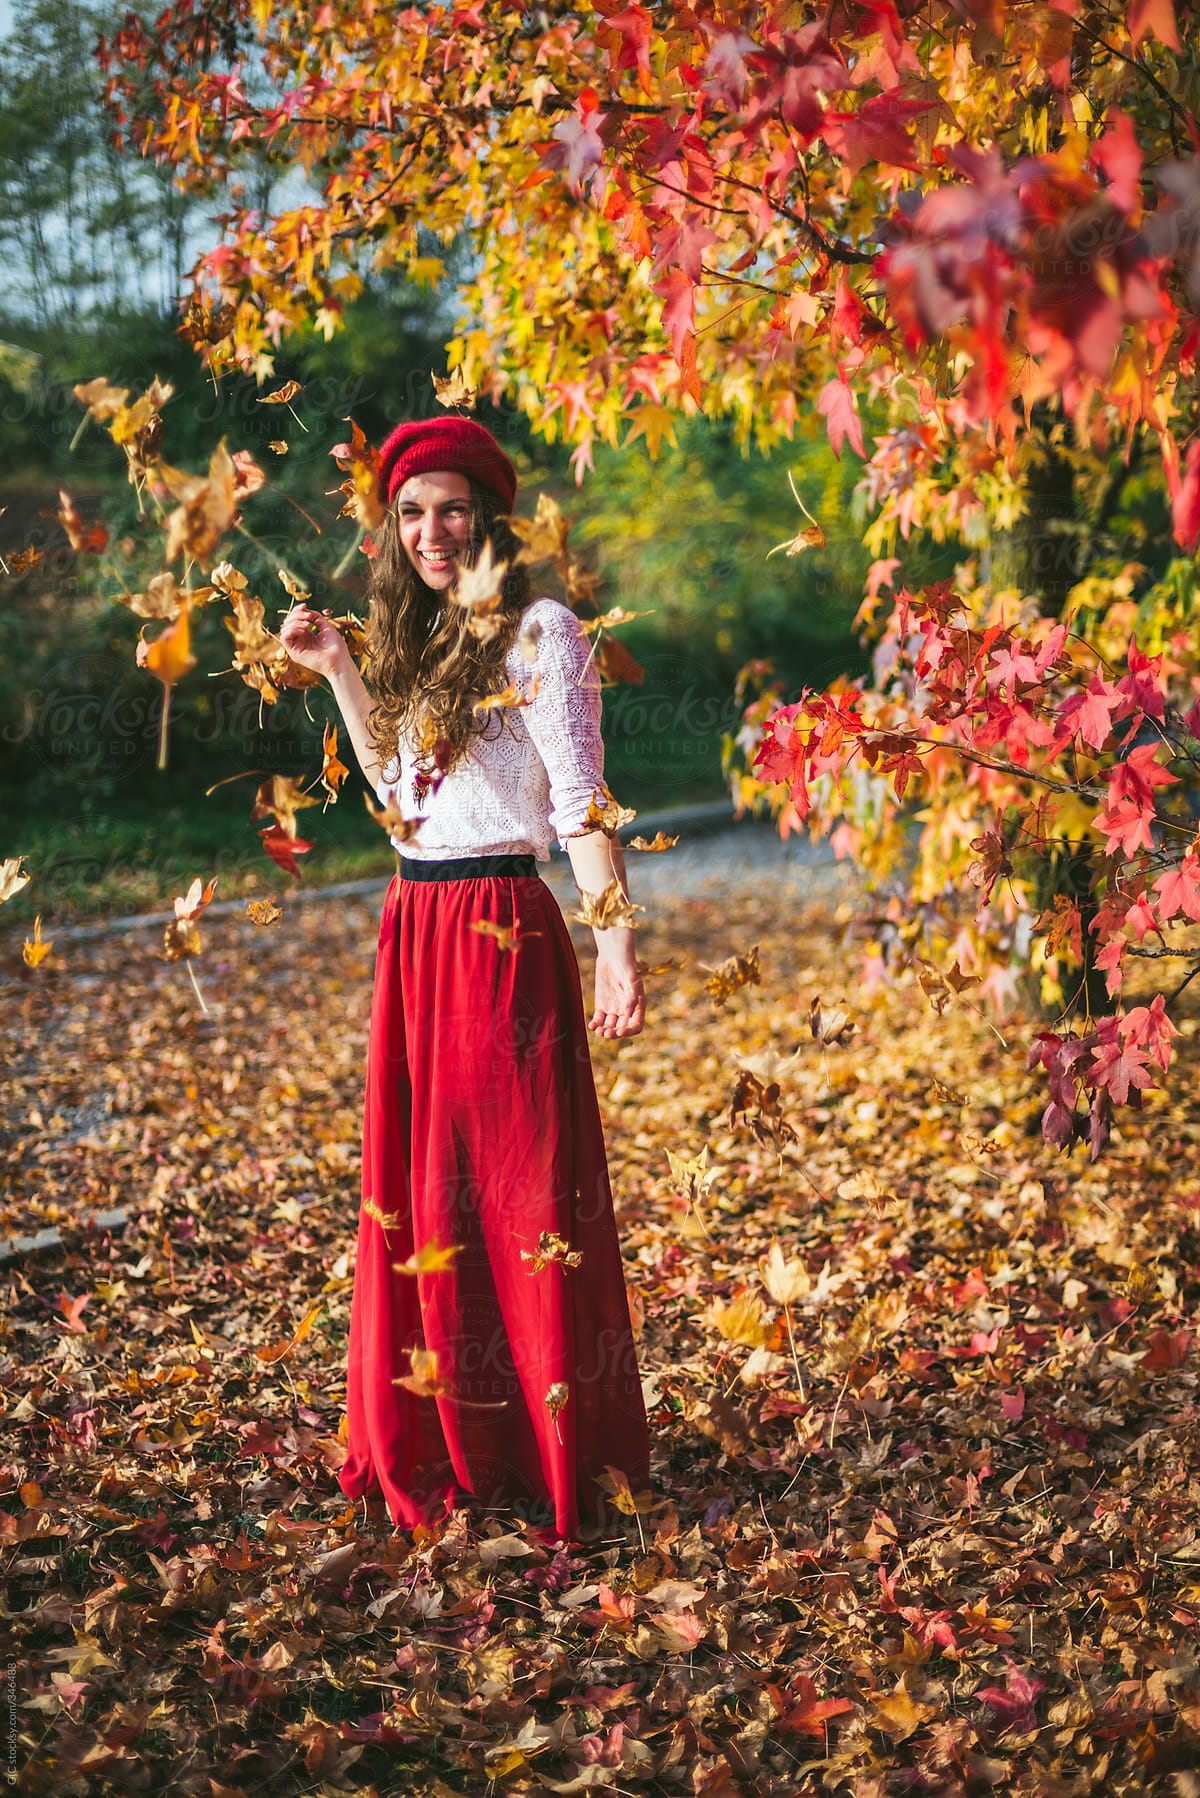 Young woman dressed in red enjoying the fall season in a forest